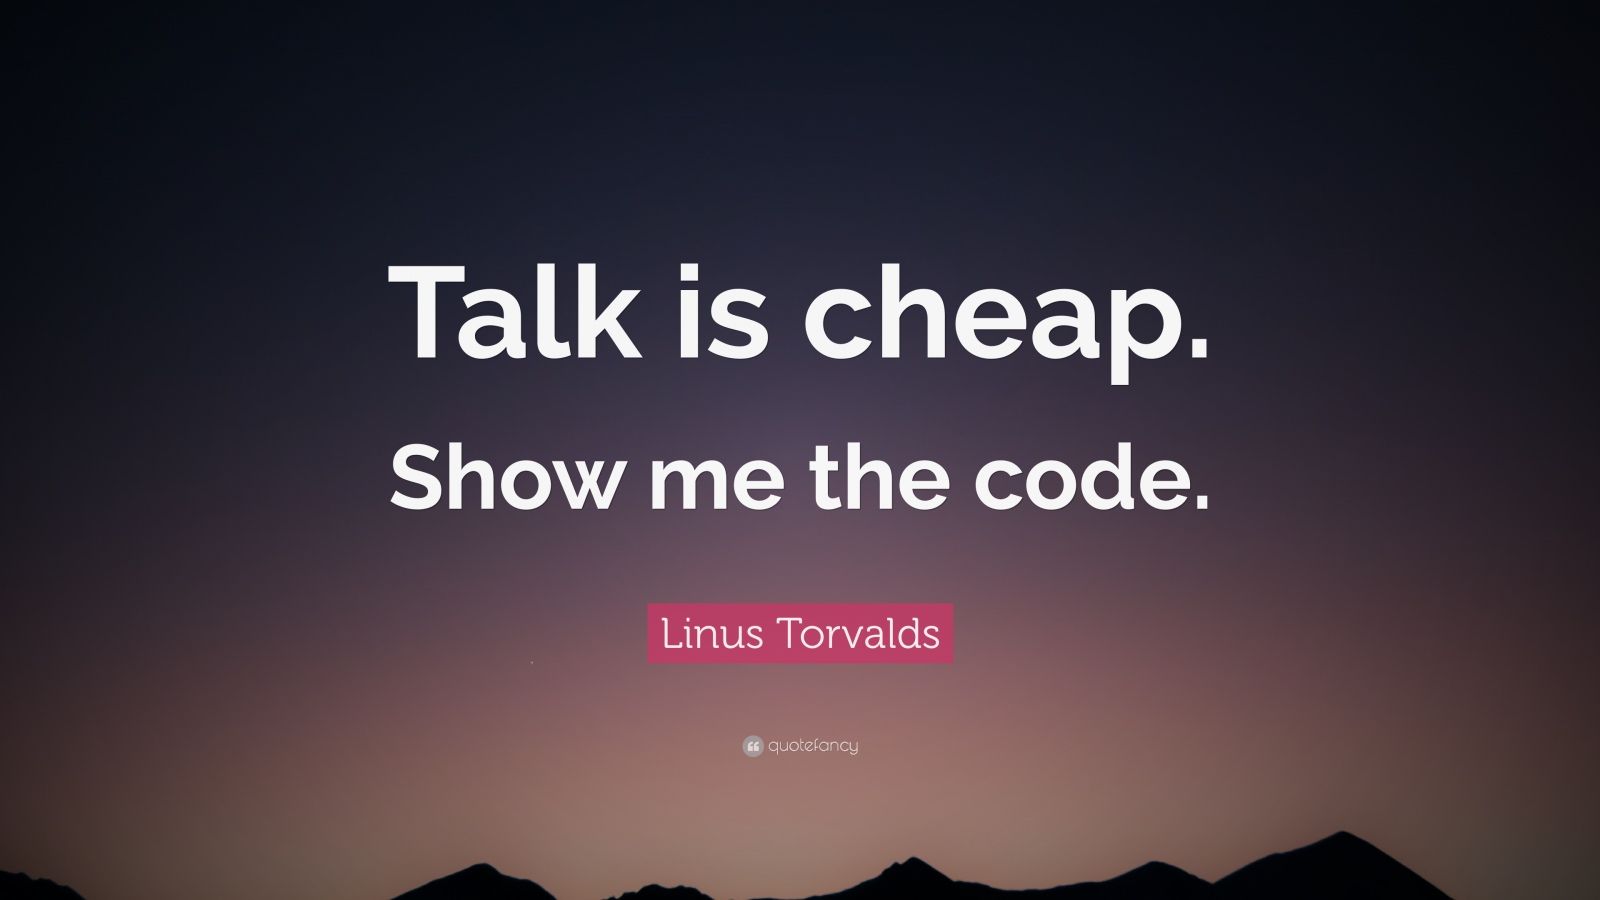 Linus Torvalds Quote: “Talk is cheap. Show me the code.” (14 wallpapers